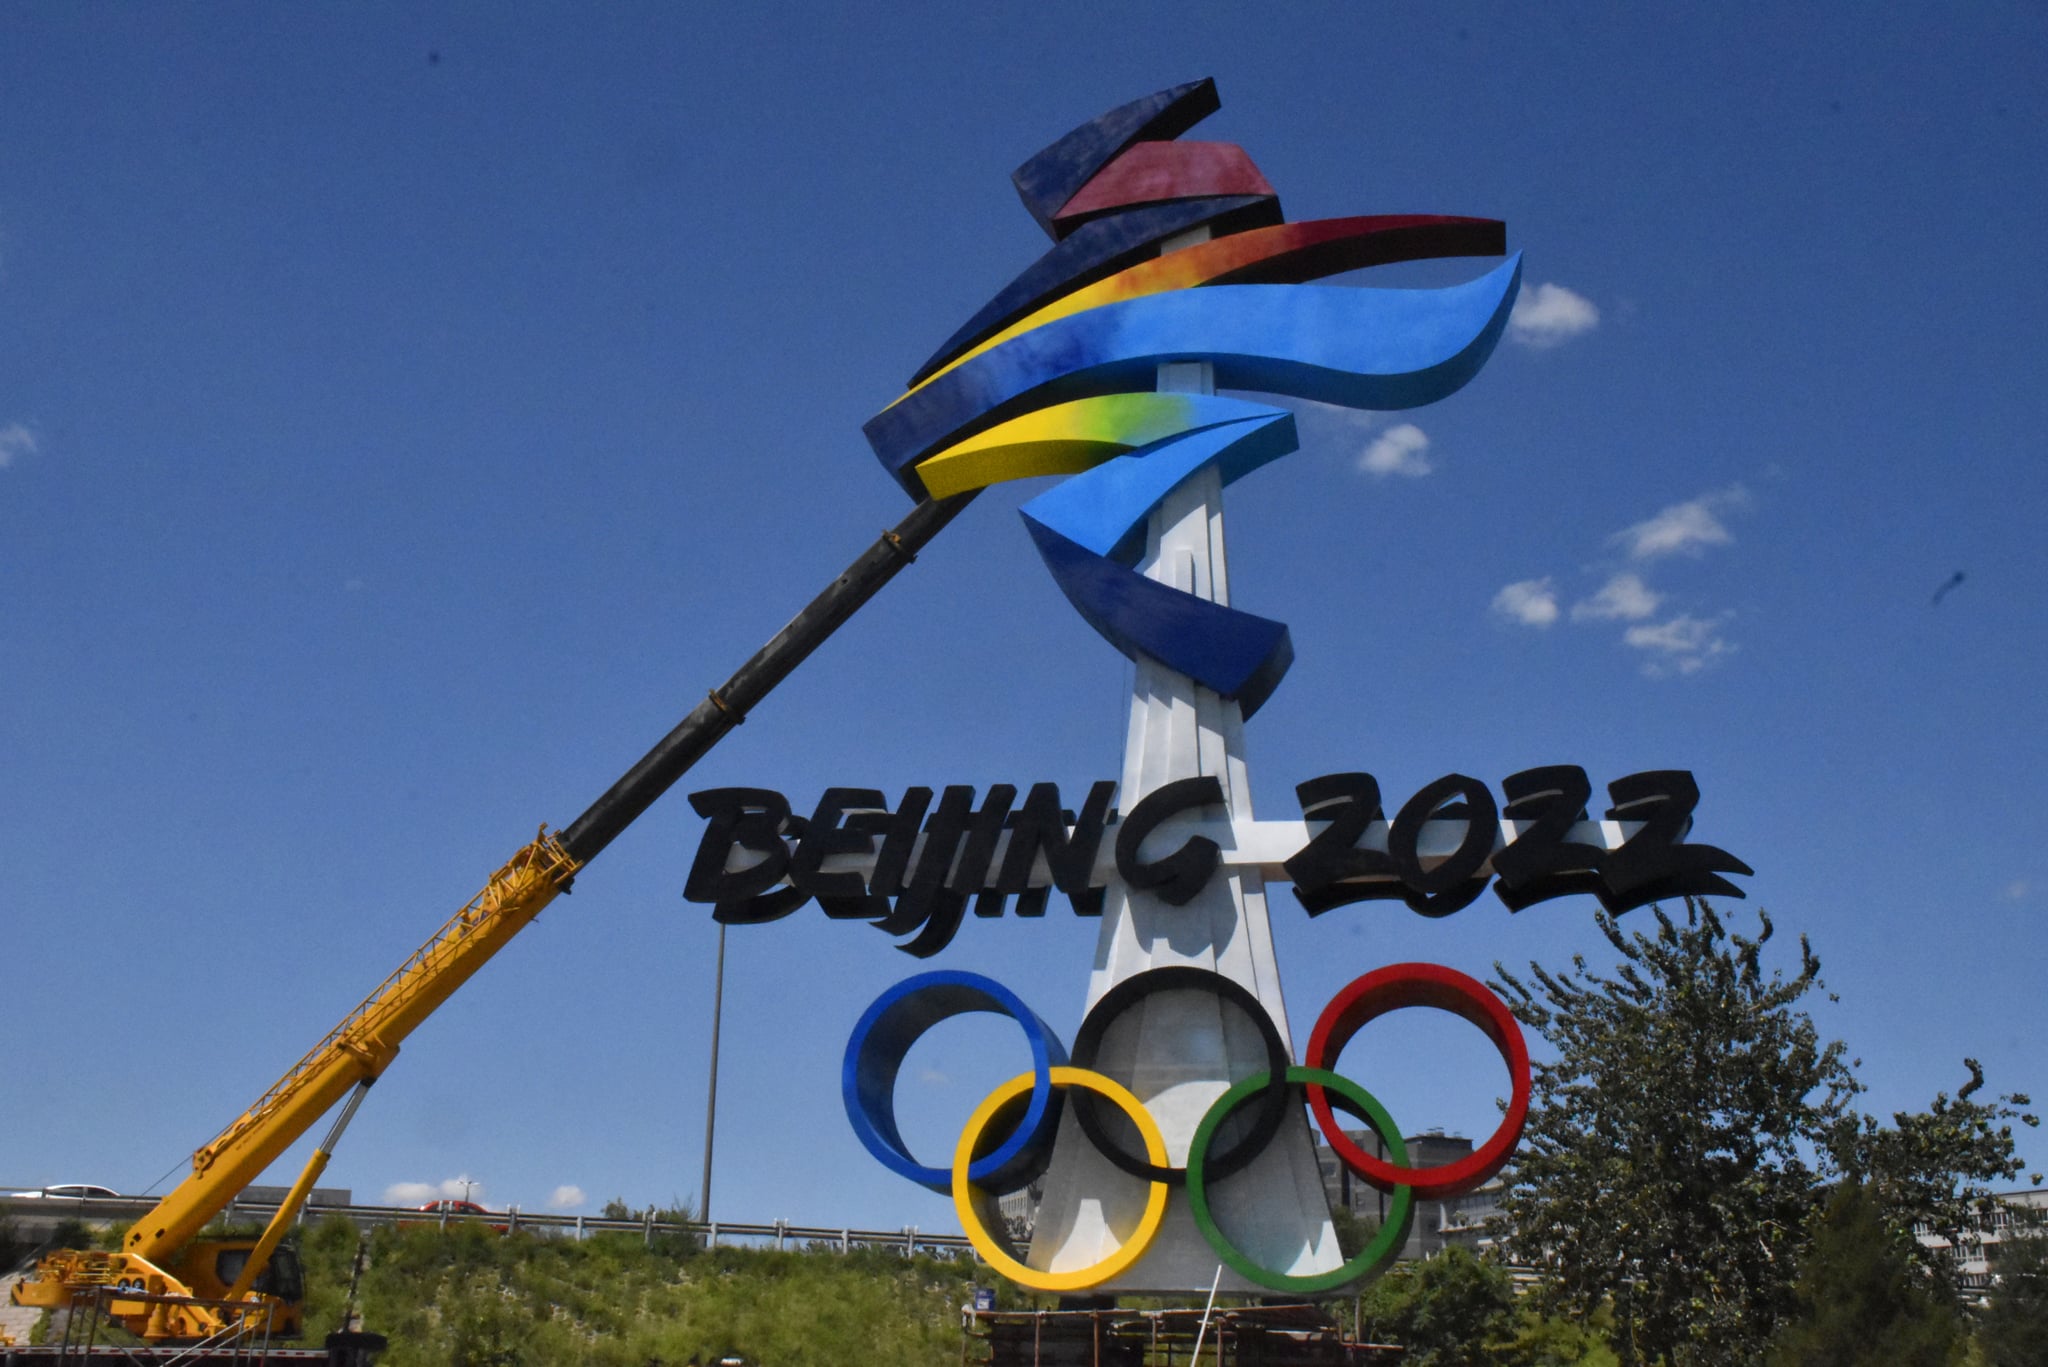 BEIJING, CHINA - AUGUST 01: The Emblem of Beijing 2022 Olympic Winter Games is installed at Shijingshan district on August 1, 2021 in Beijing, China. (Photo by VCG/VCG via Getty Images)